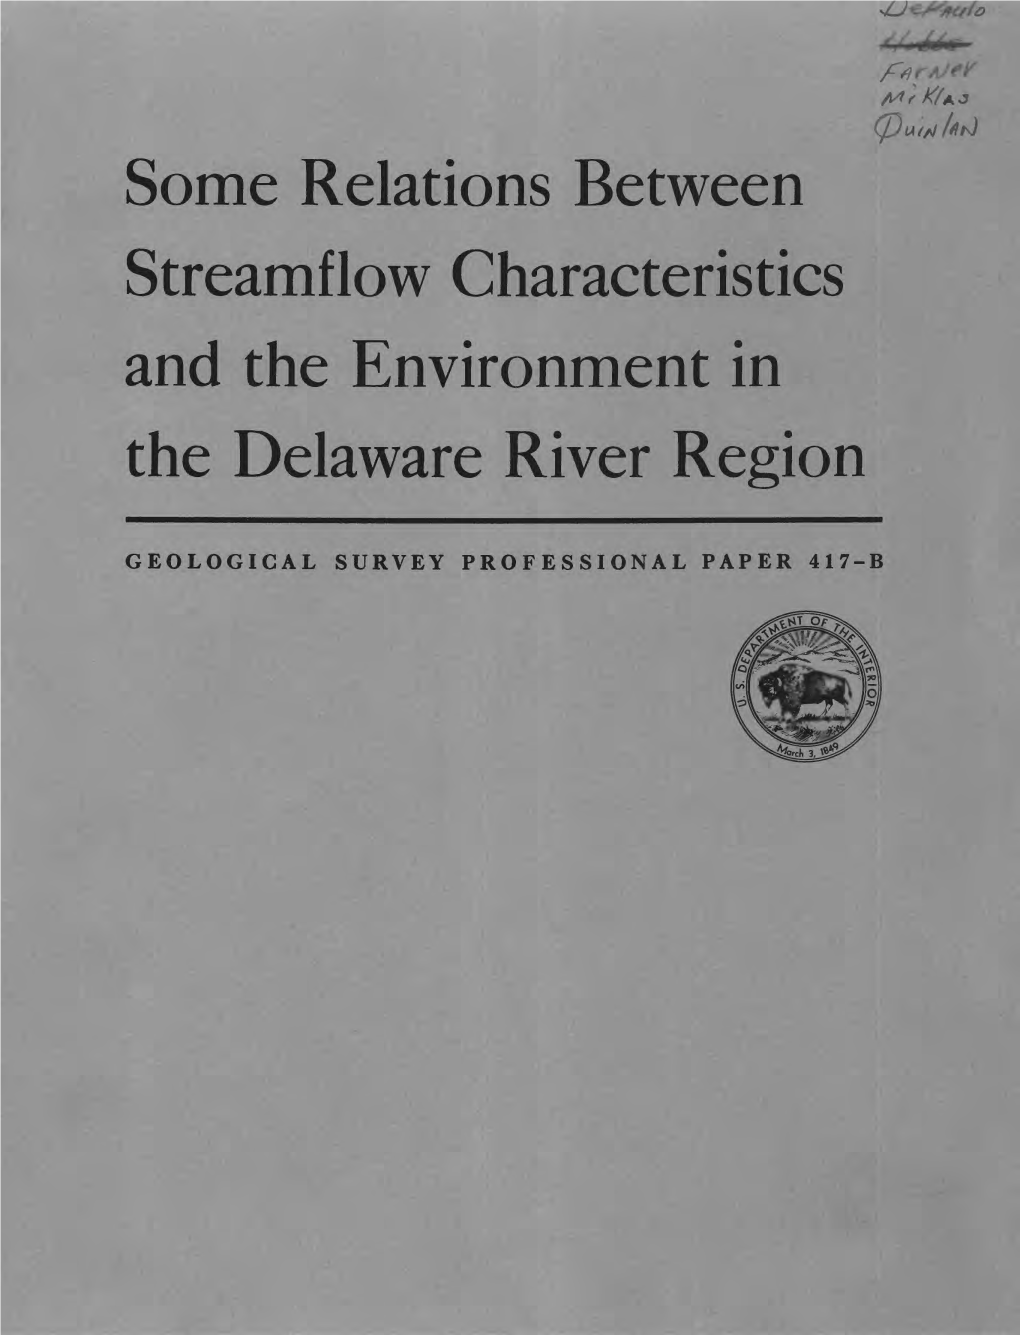 Some Relations Between Streamflow Characteristics and the Environment in the Delaware River Region